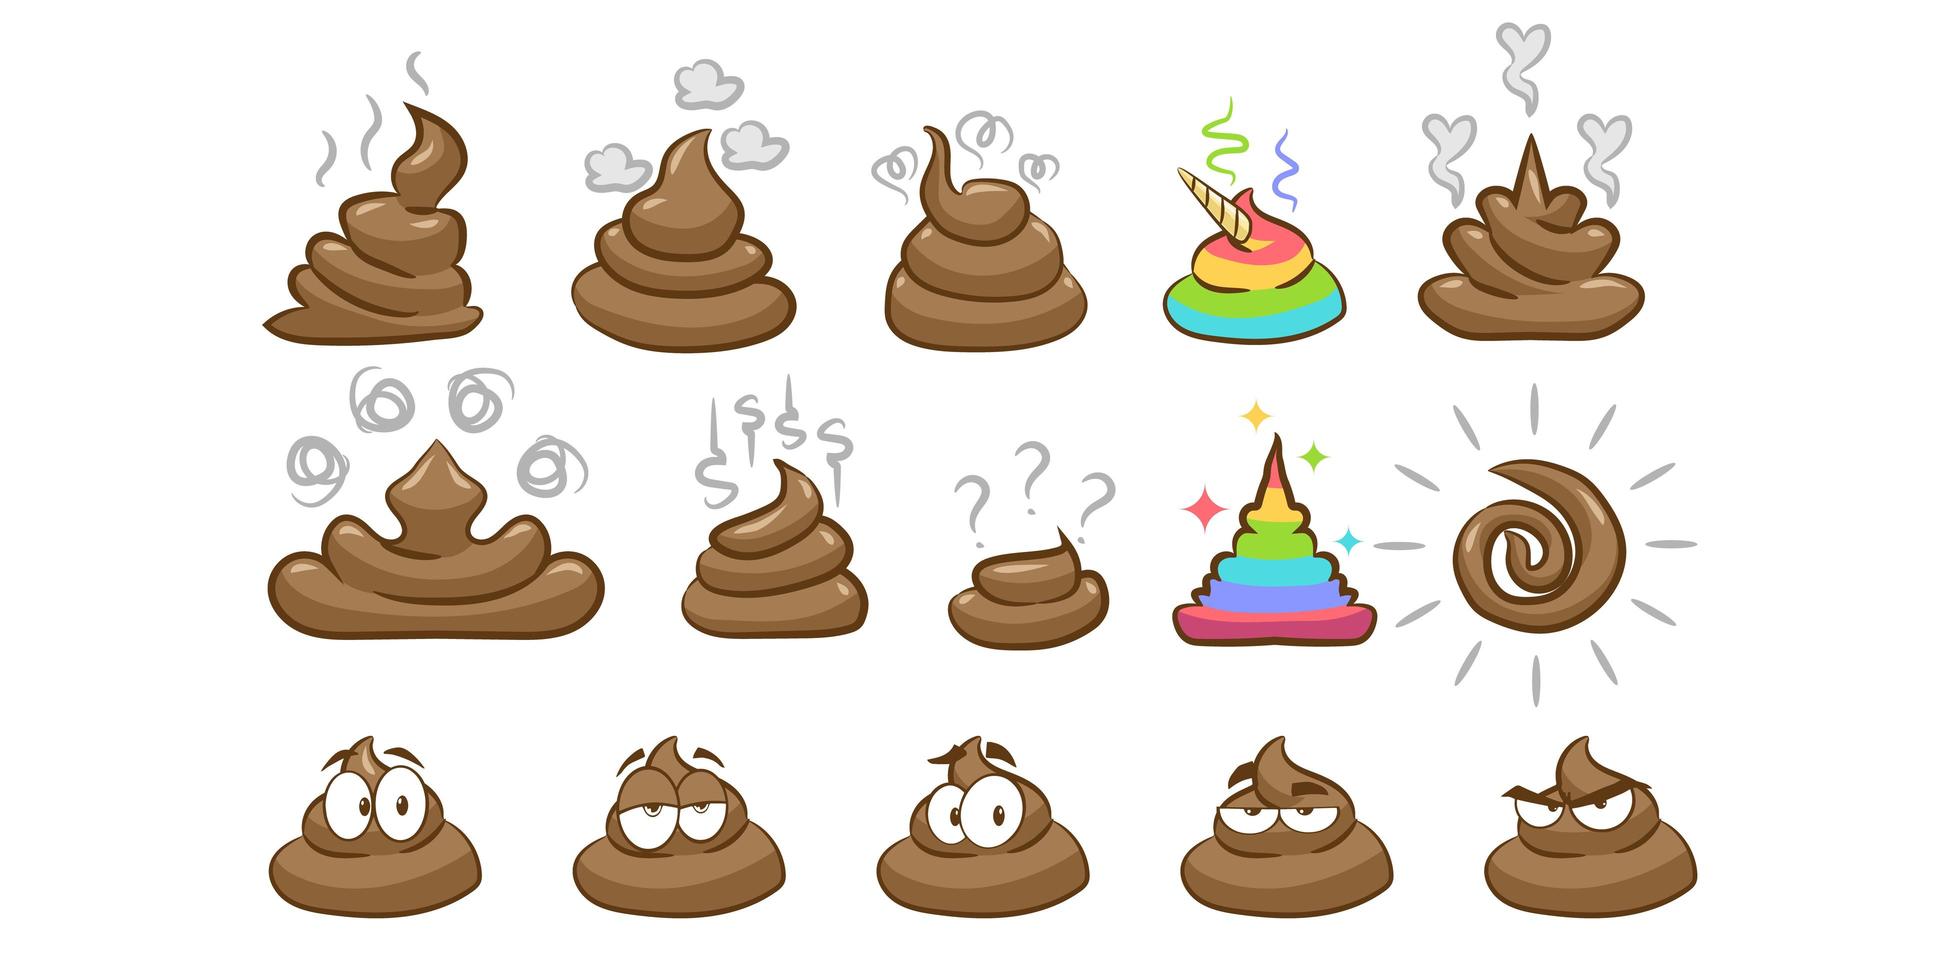 Picture illustration of poo emoji in different shapes